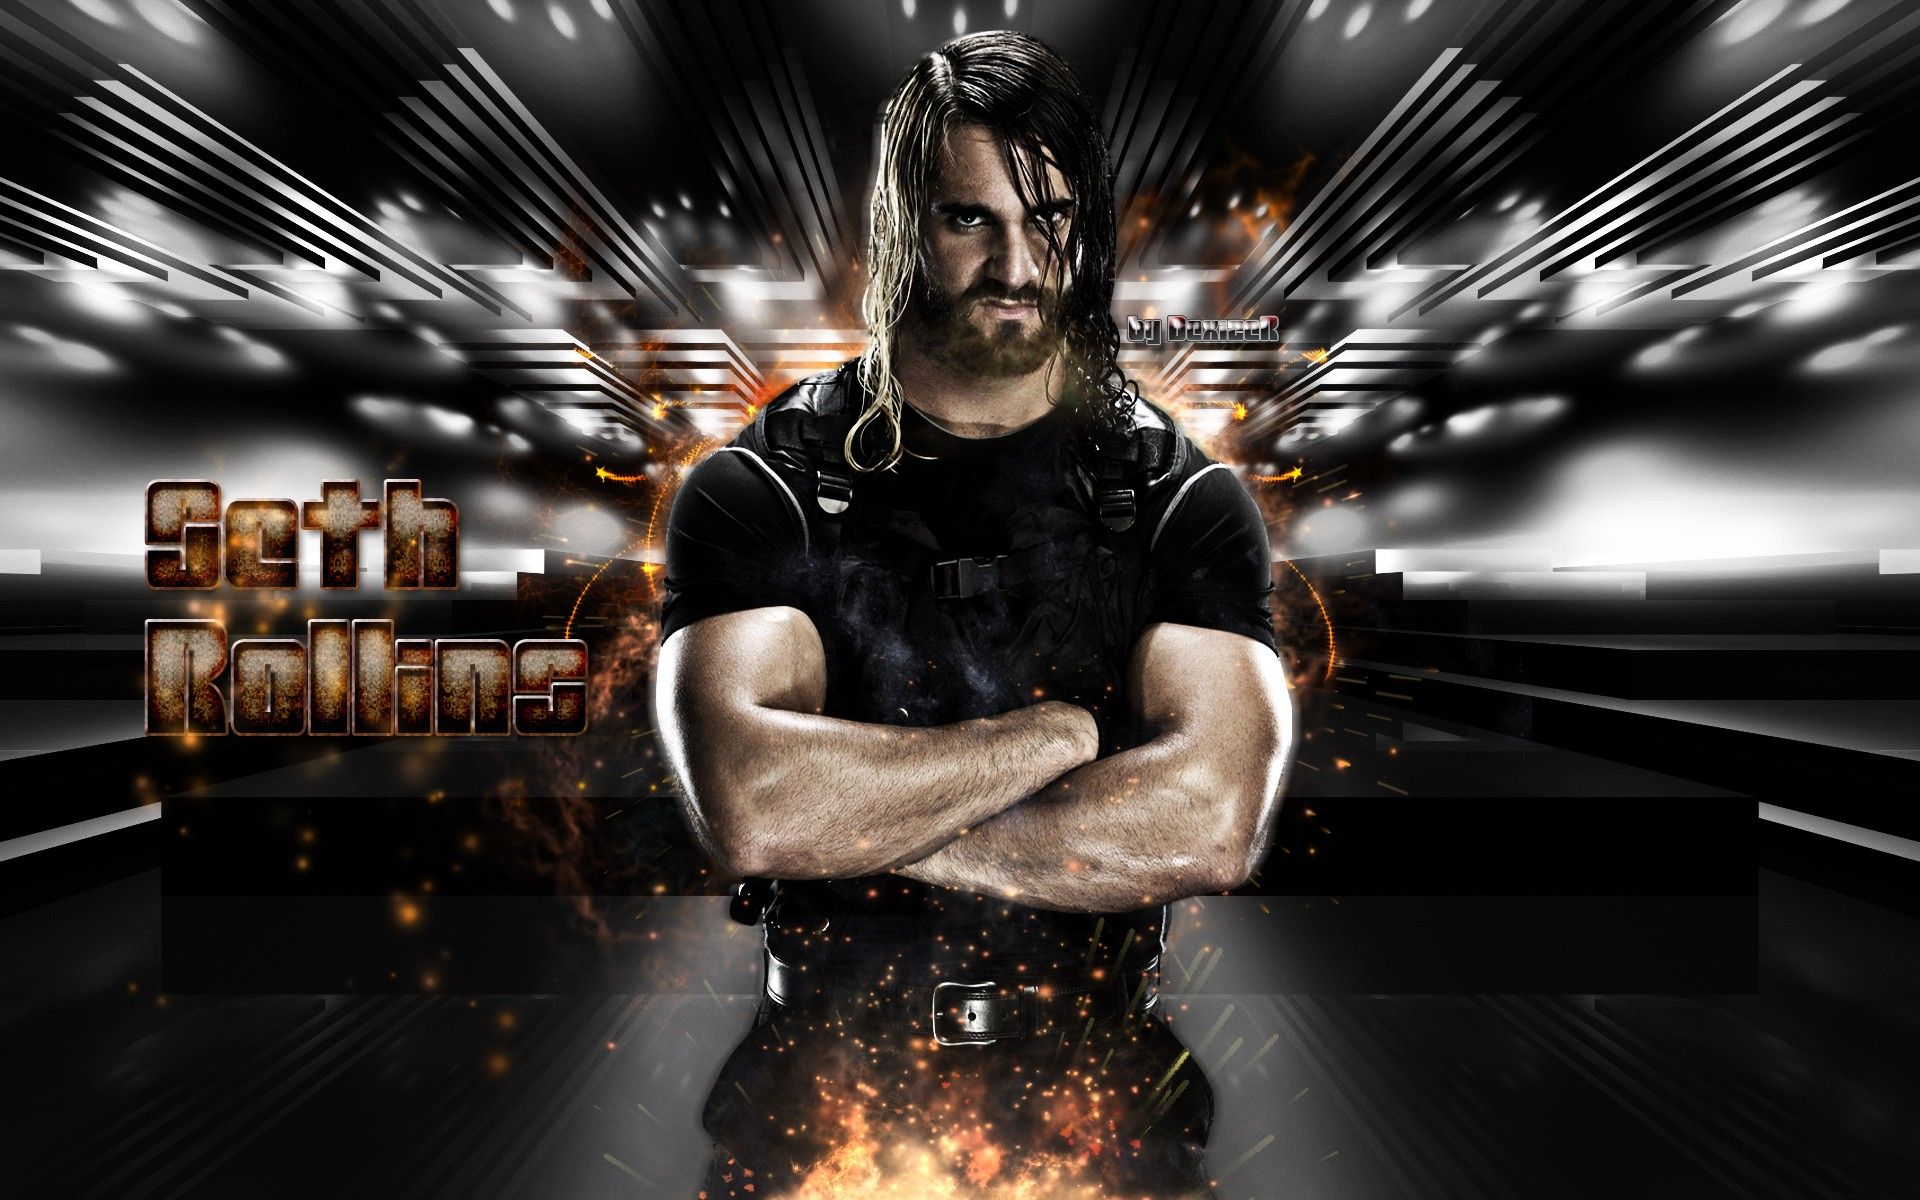 WWE Superstar Seth Rollins Wallpapers - New HD Backgrounds